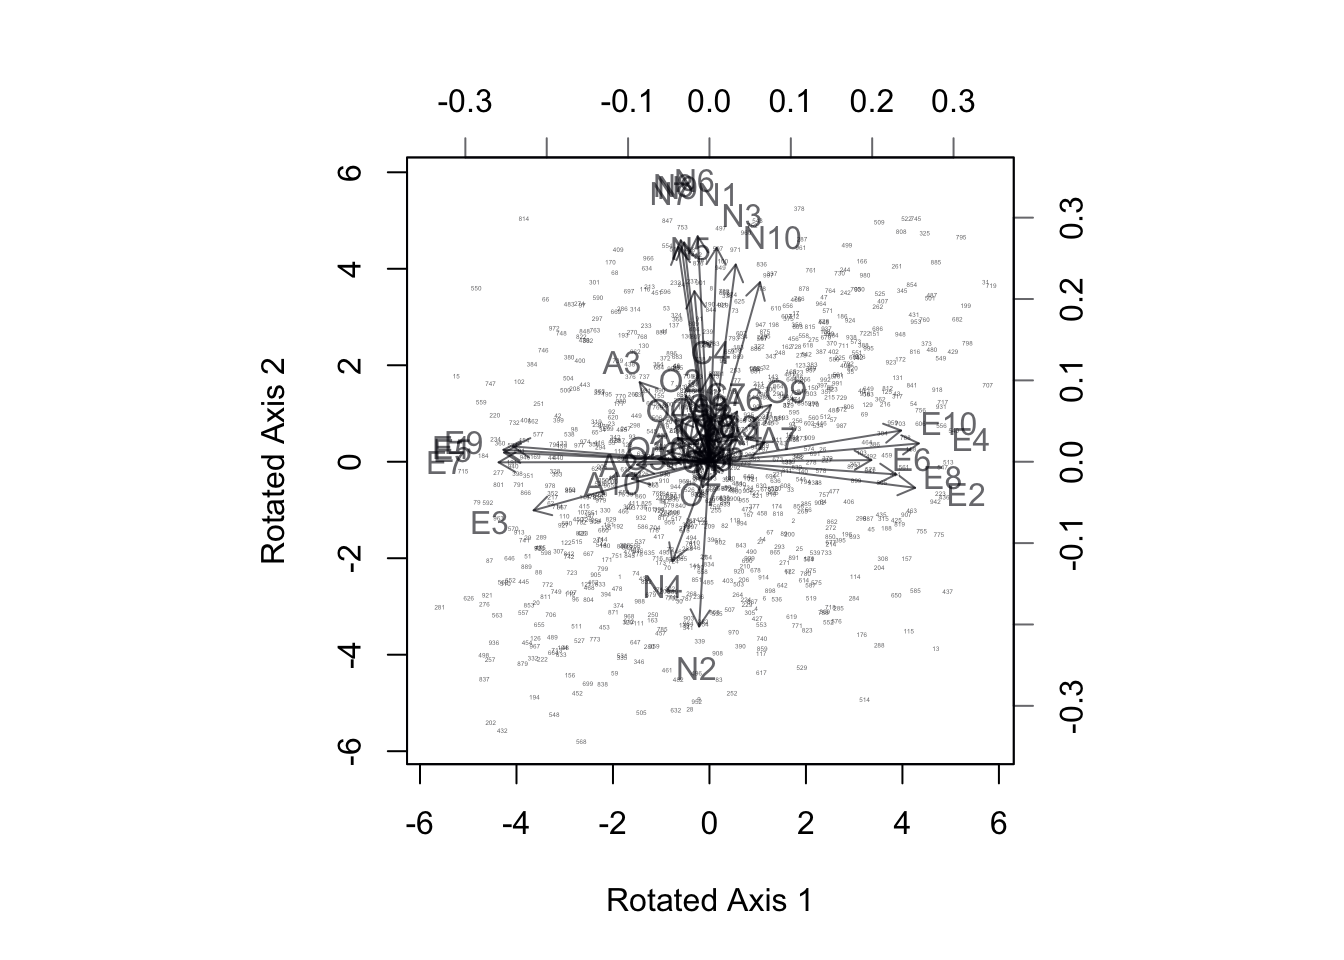 BiPlot of Projection onto Rotated Axes 1,2. Extroversion questions align with axis 1, Neuroticism with Axis 2